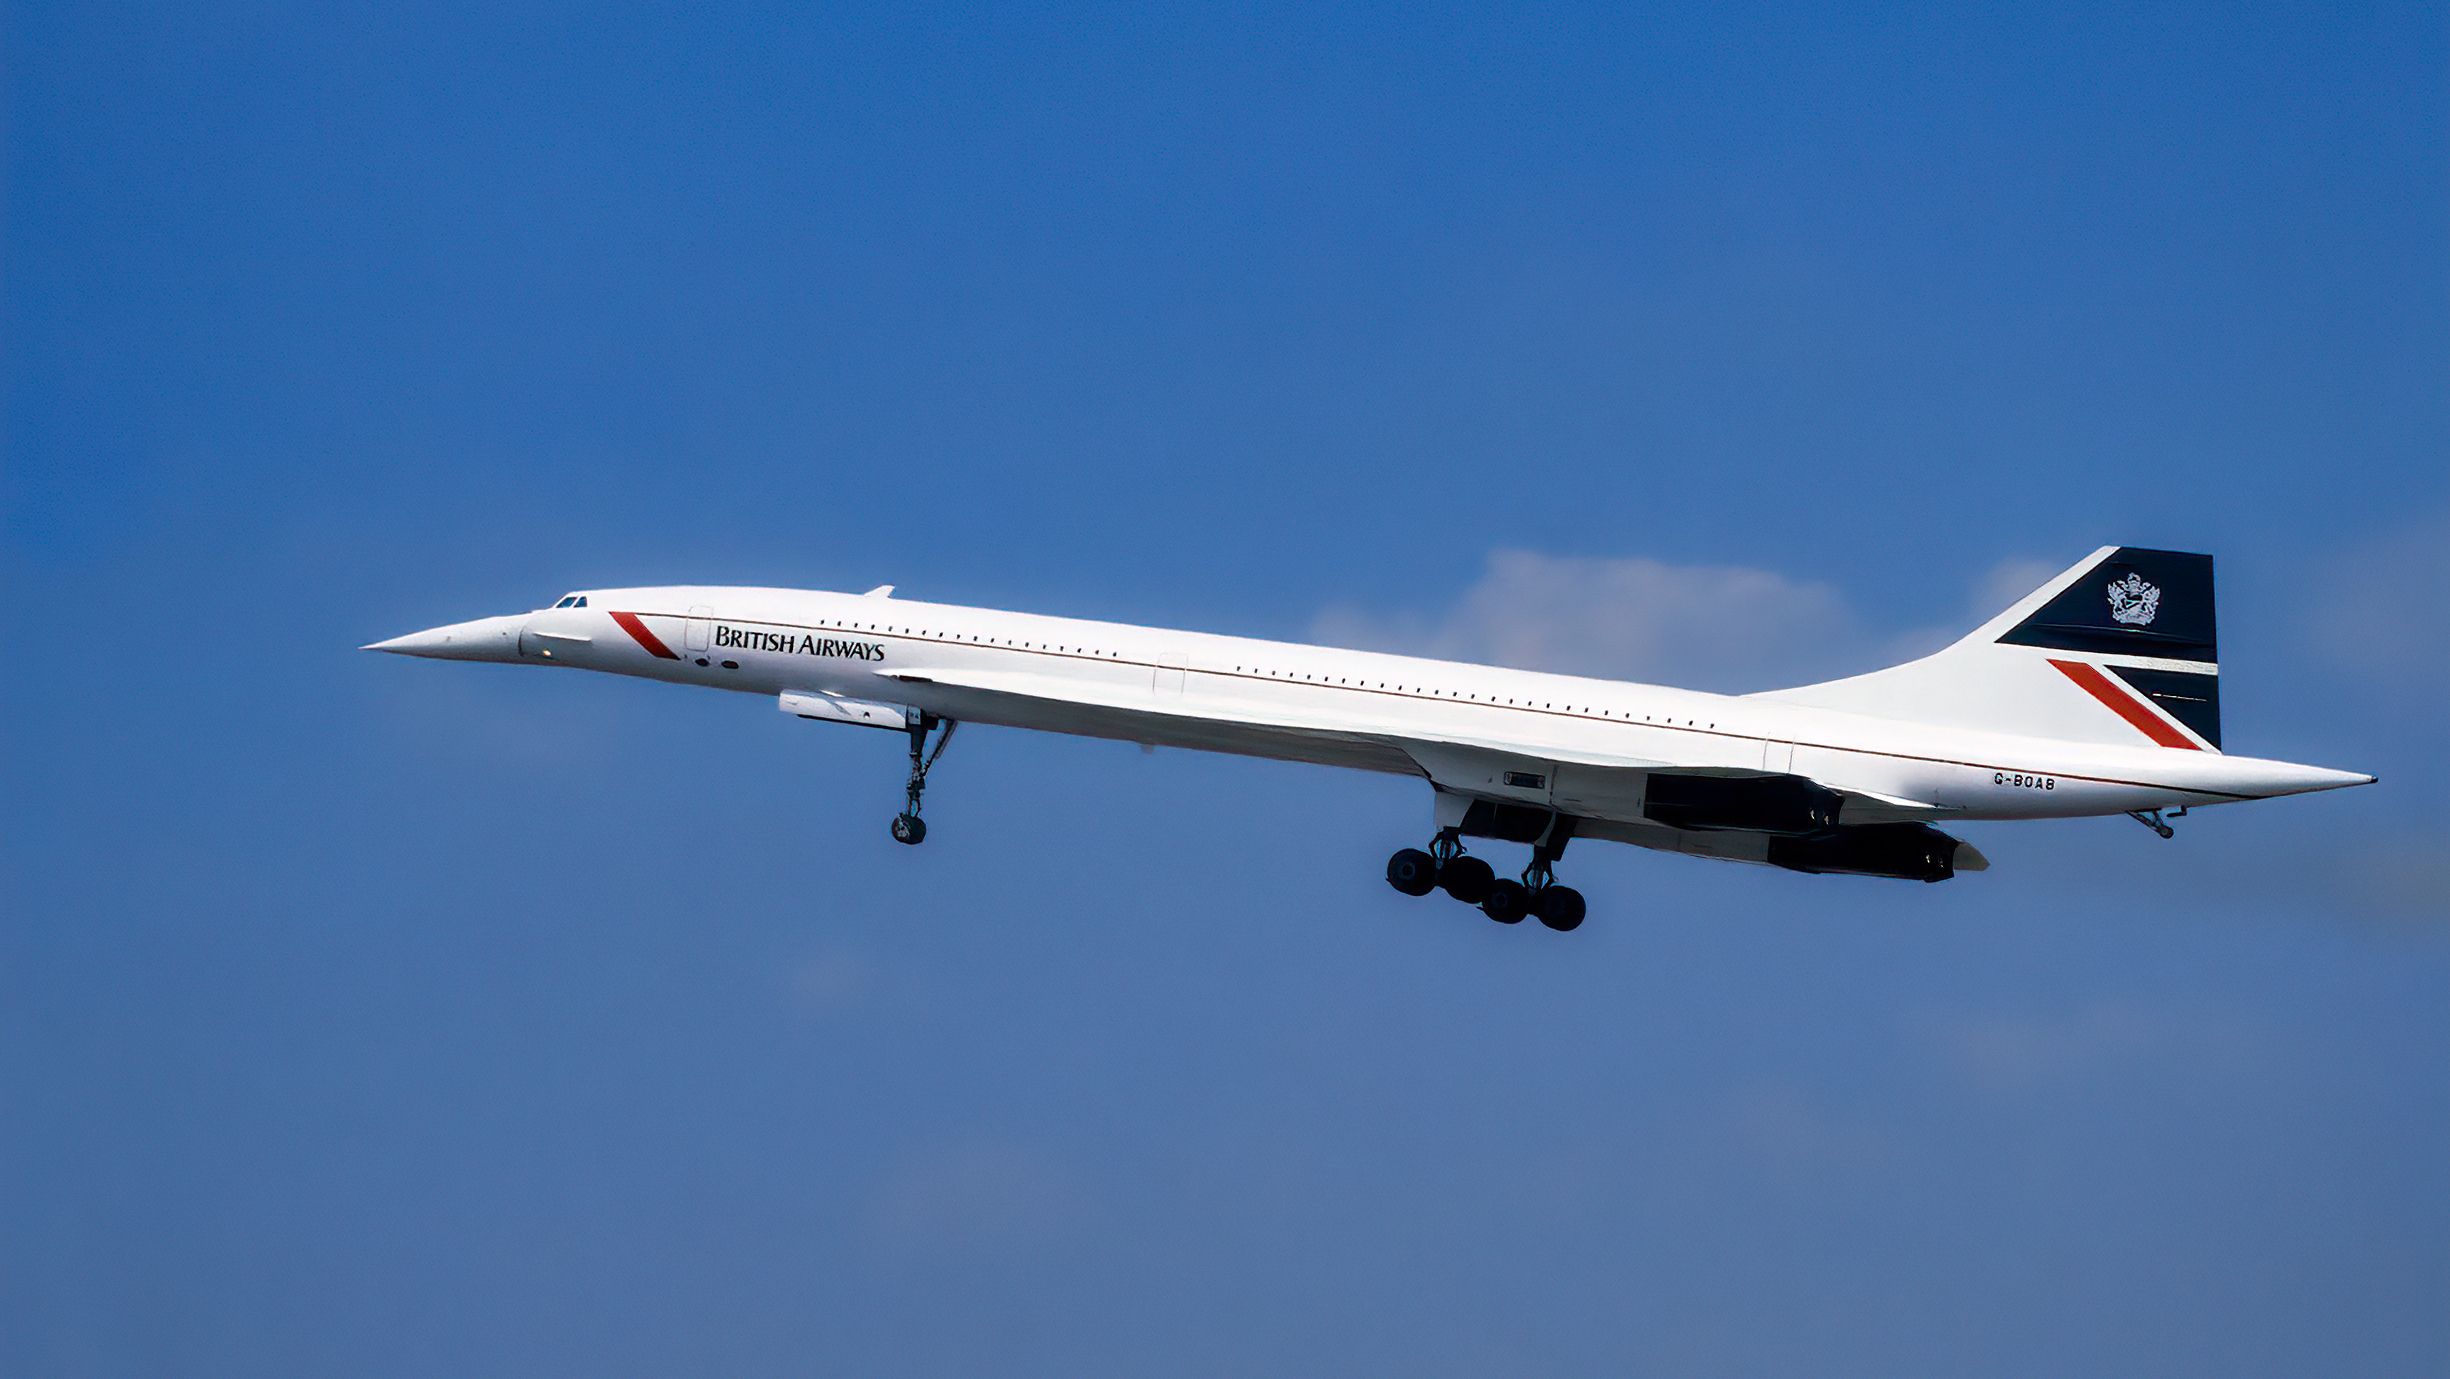 A British Airways Concorde flying in the sky.